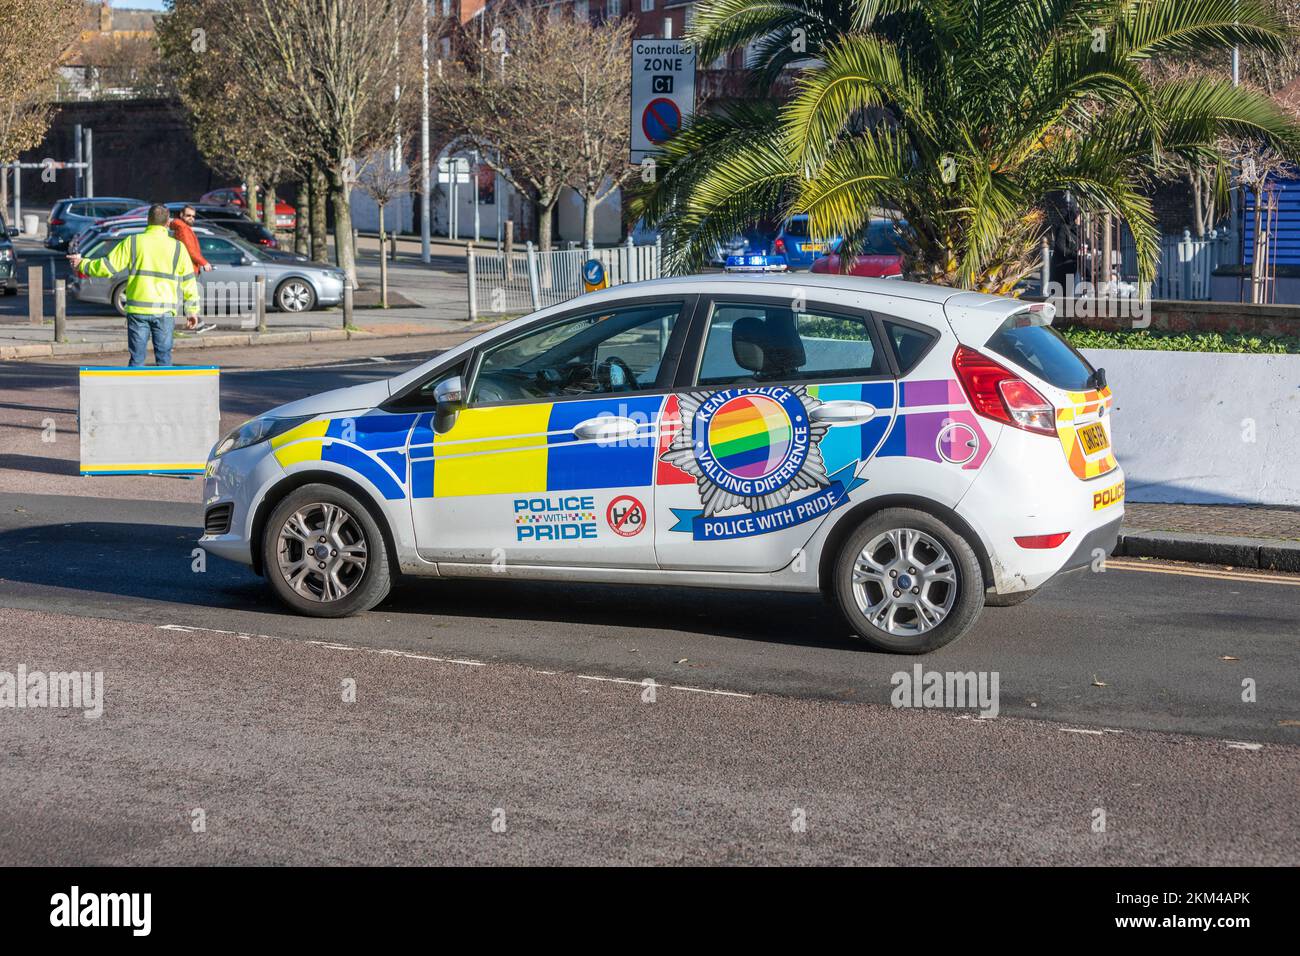 A police car with Police Pride graphics on it. Stock Photo